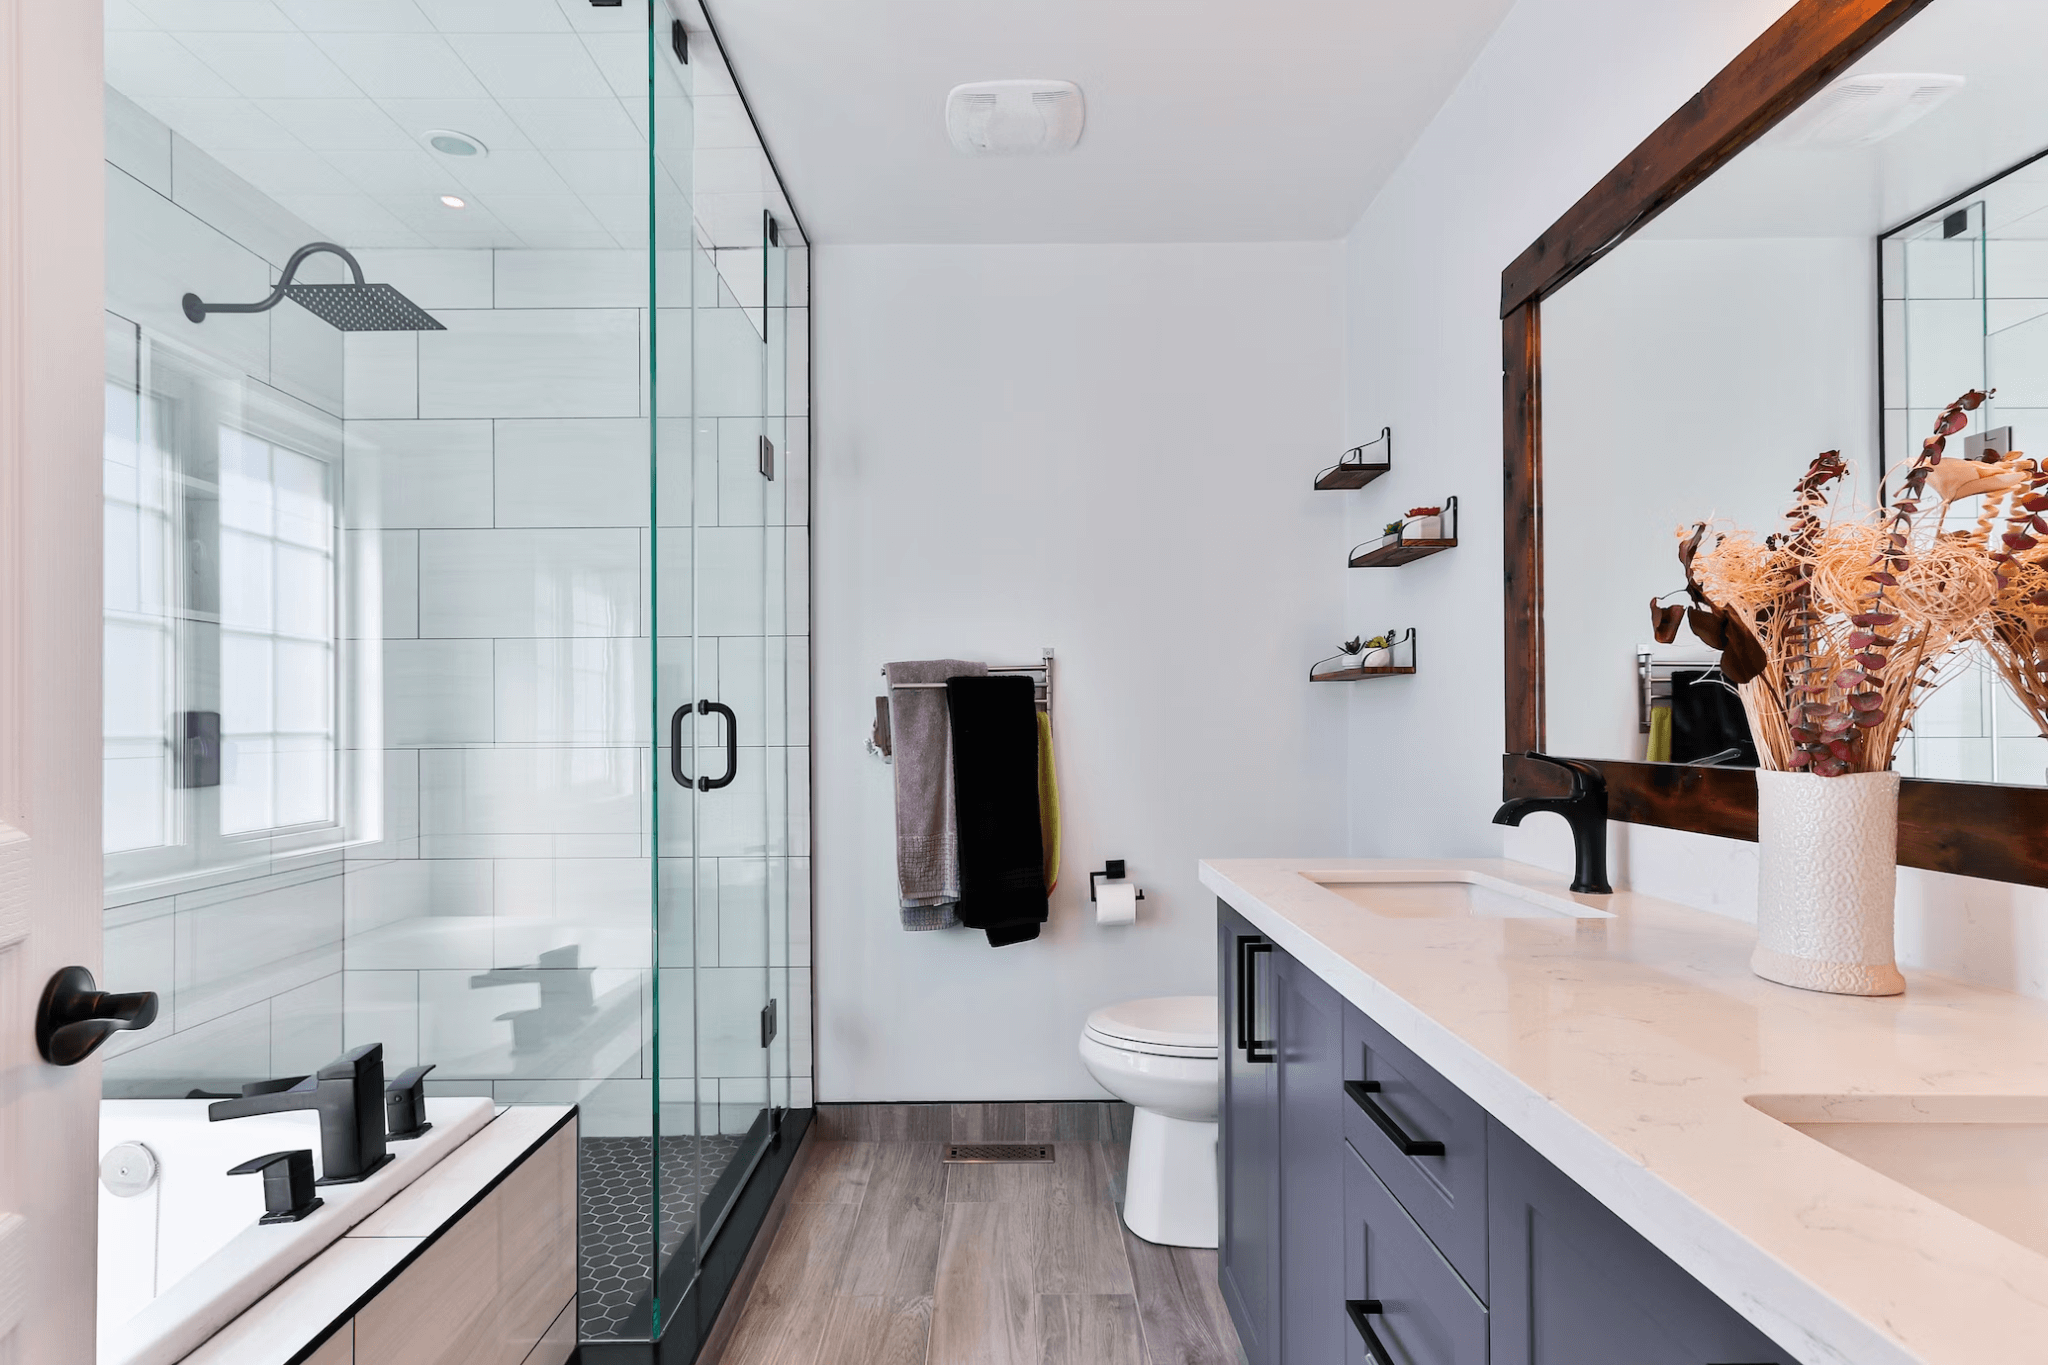 Freestanding vs Fitted Bathroom Furniture: Which Is Better?